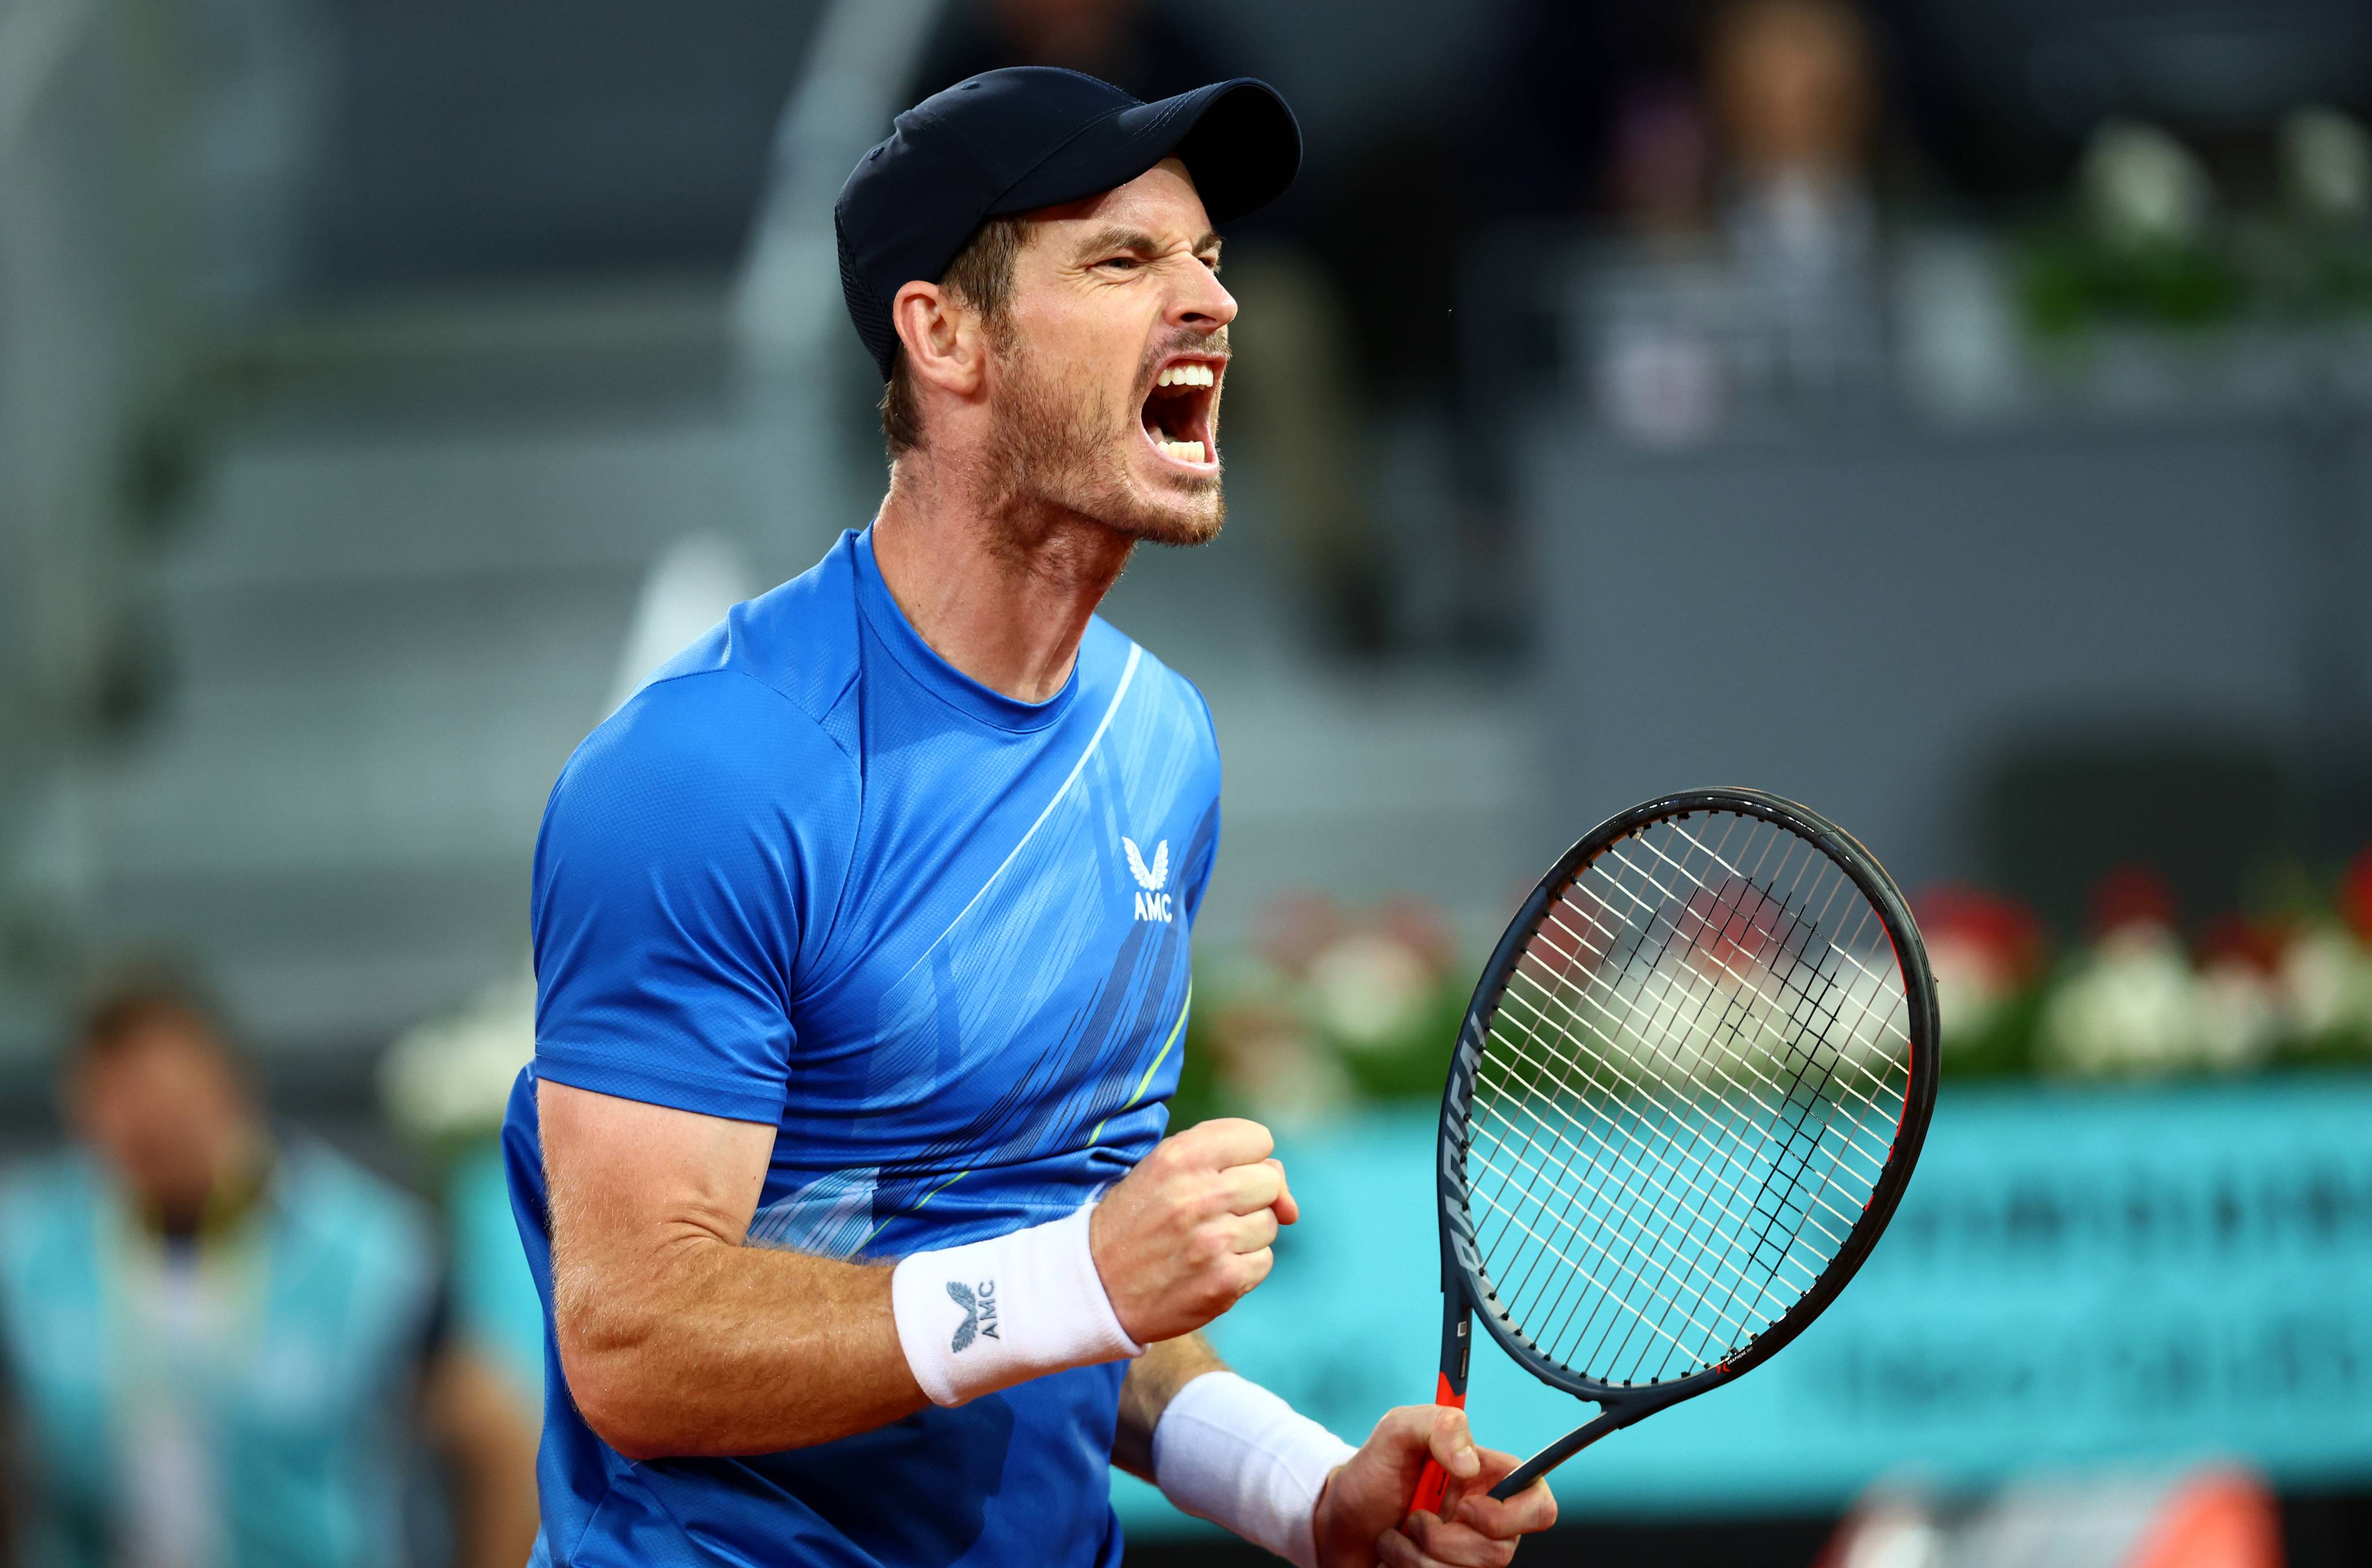 Andy Murray Tennis Player Profile and Rankings LTA